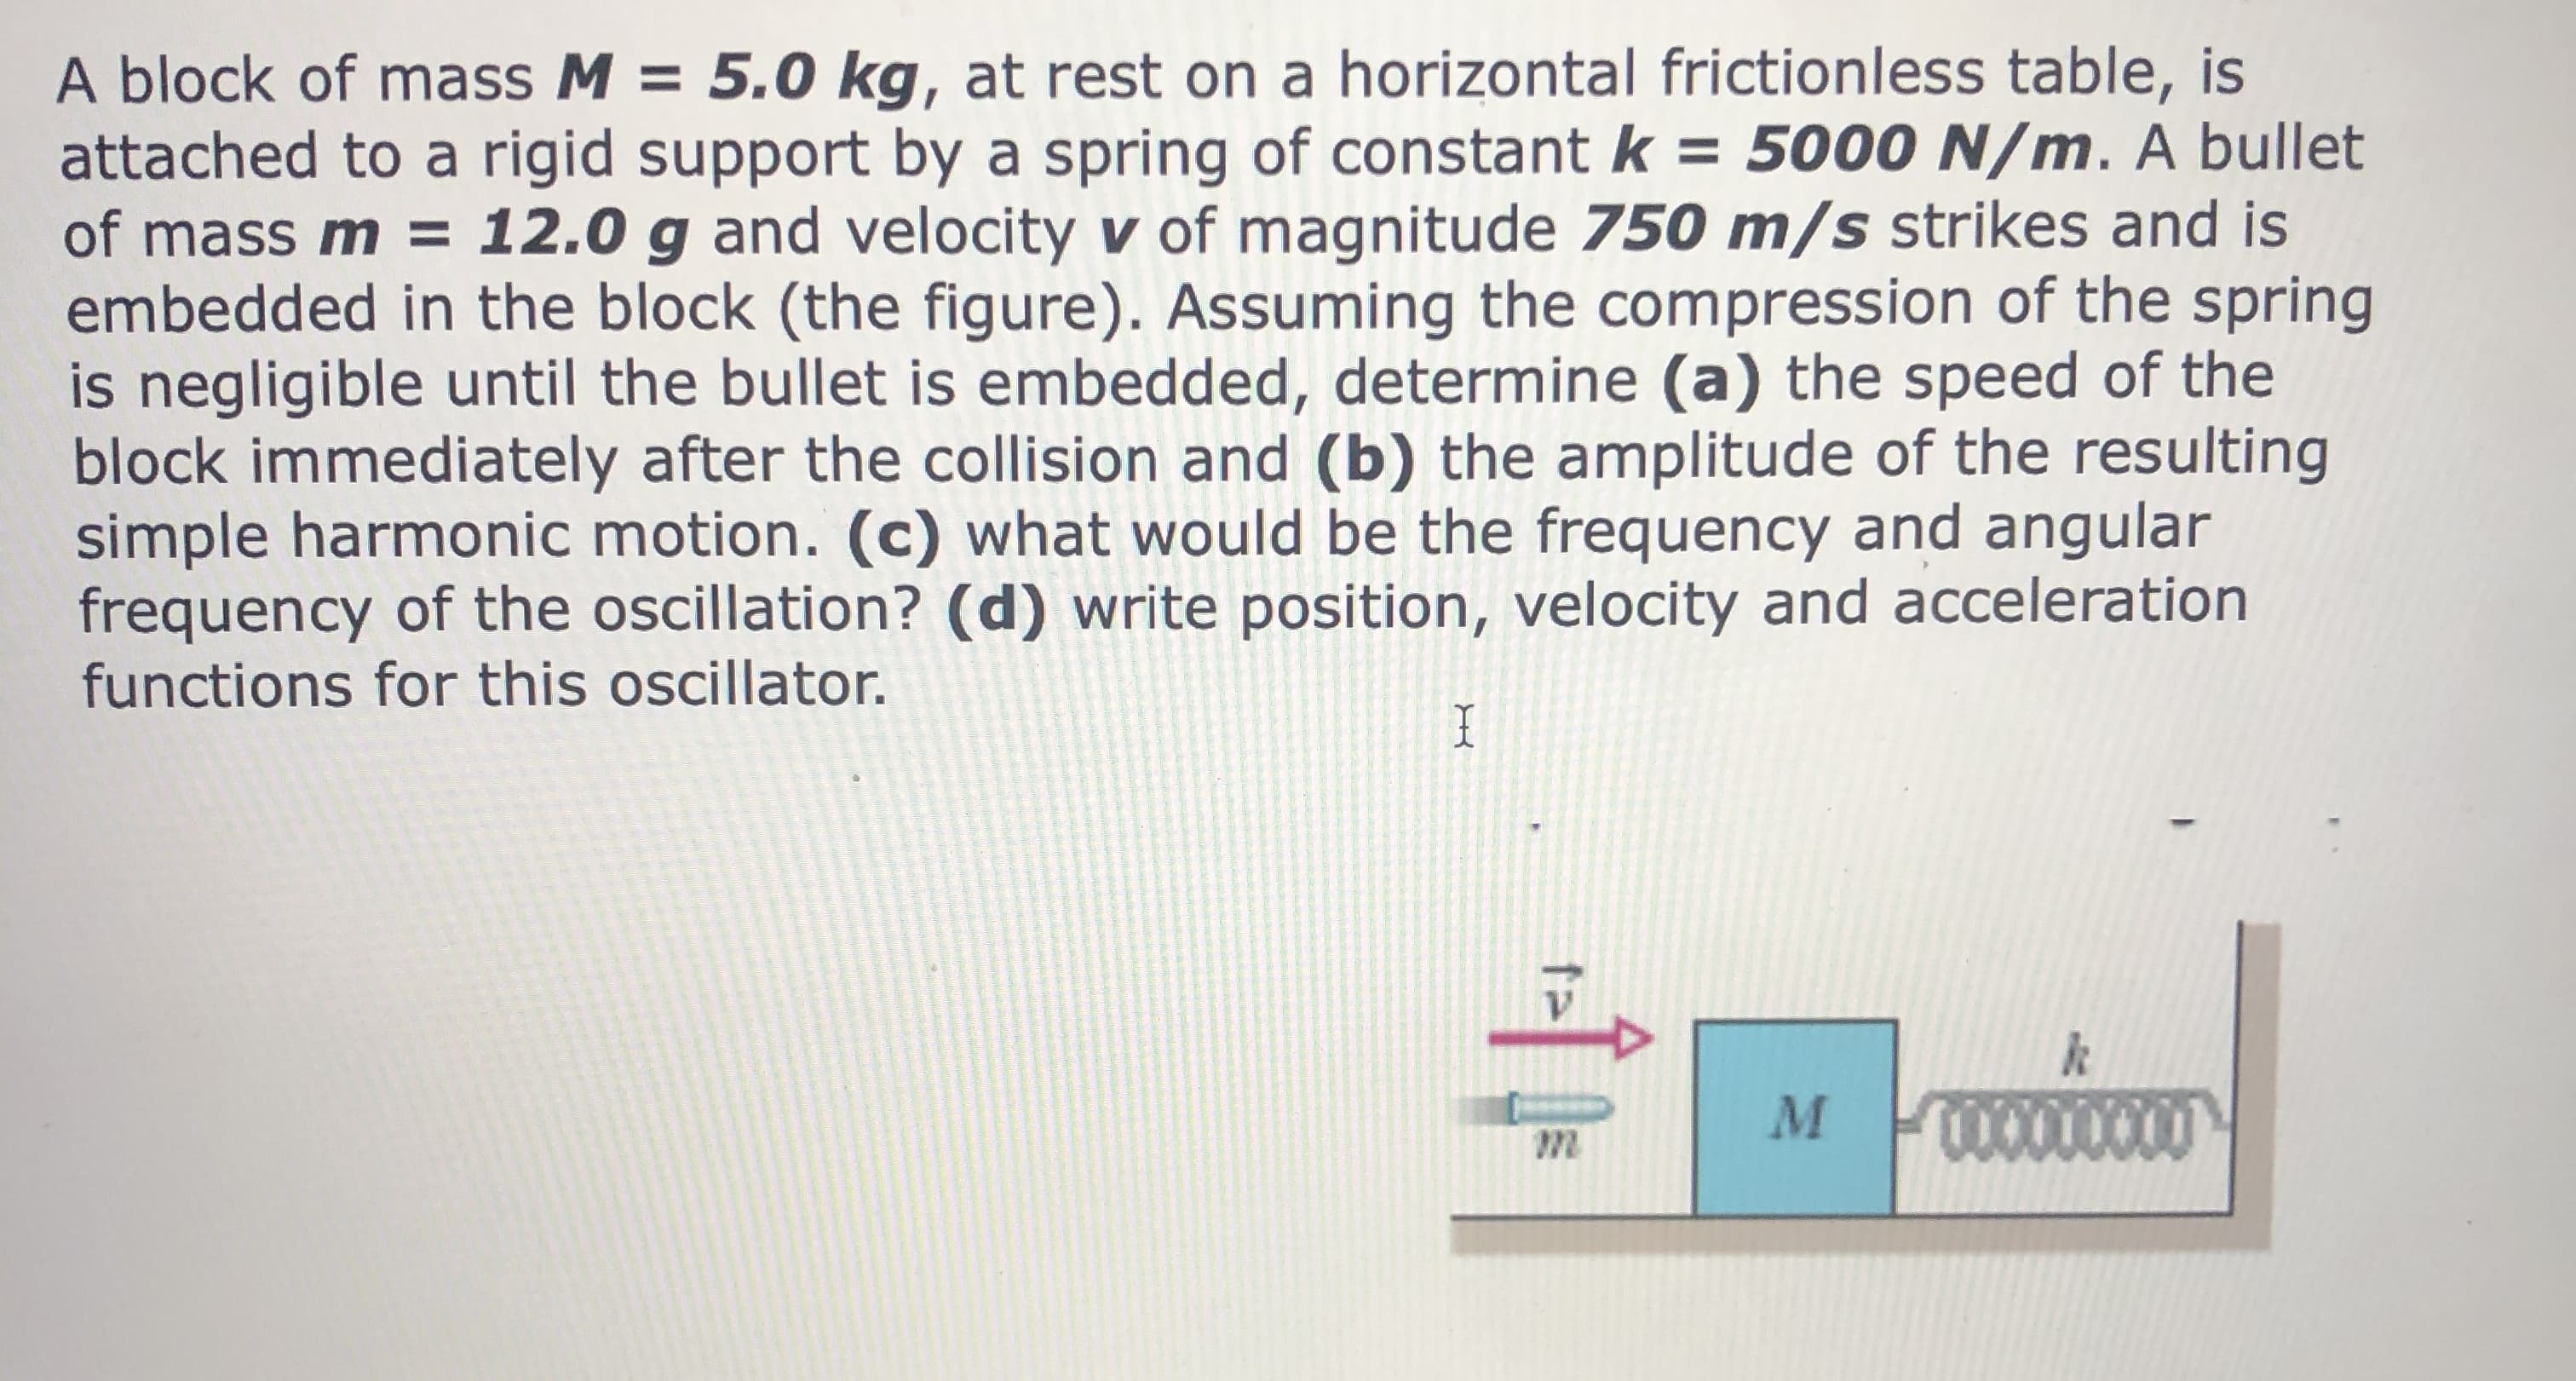 A block of mass M = 5.0 kg, at rest on a horizontal frictionless table, is
attached to a rigid support by a spring of constant k = 5000 N/m. A bullet
of mass m = 12.0 g and velocity v of magnitude 750 m/s strikes and is
embedded in the block (the figure). Assuming the compression of the spring
is negligible until the bullet is embedded, determine (a) the speed of the
block immediately after the collision and (b) the amplitude of the resulting
simple harmonic motion. (c) what would be the frequency and angular
frequency of the oscillation? (d) write position, velocity and acceleration
functions for this oscillator.
0000000
